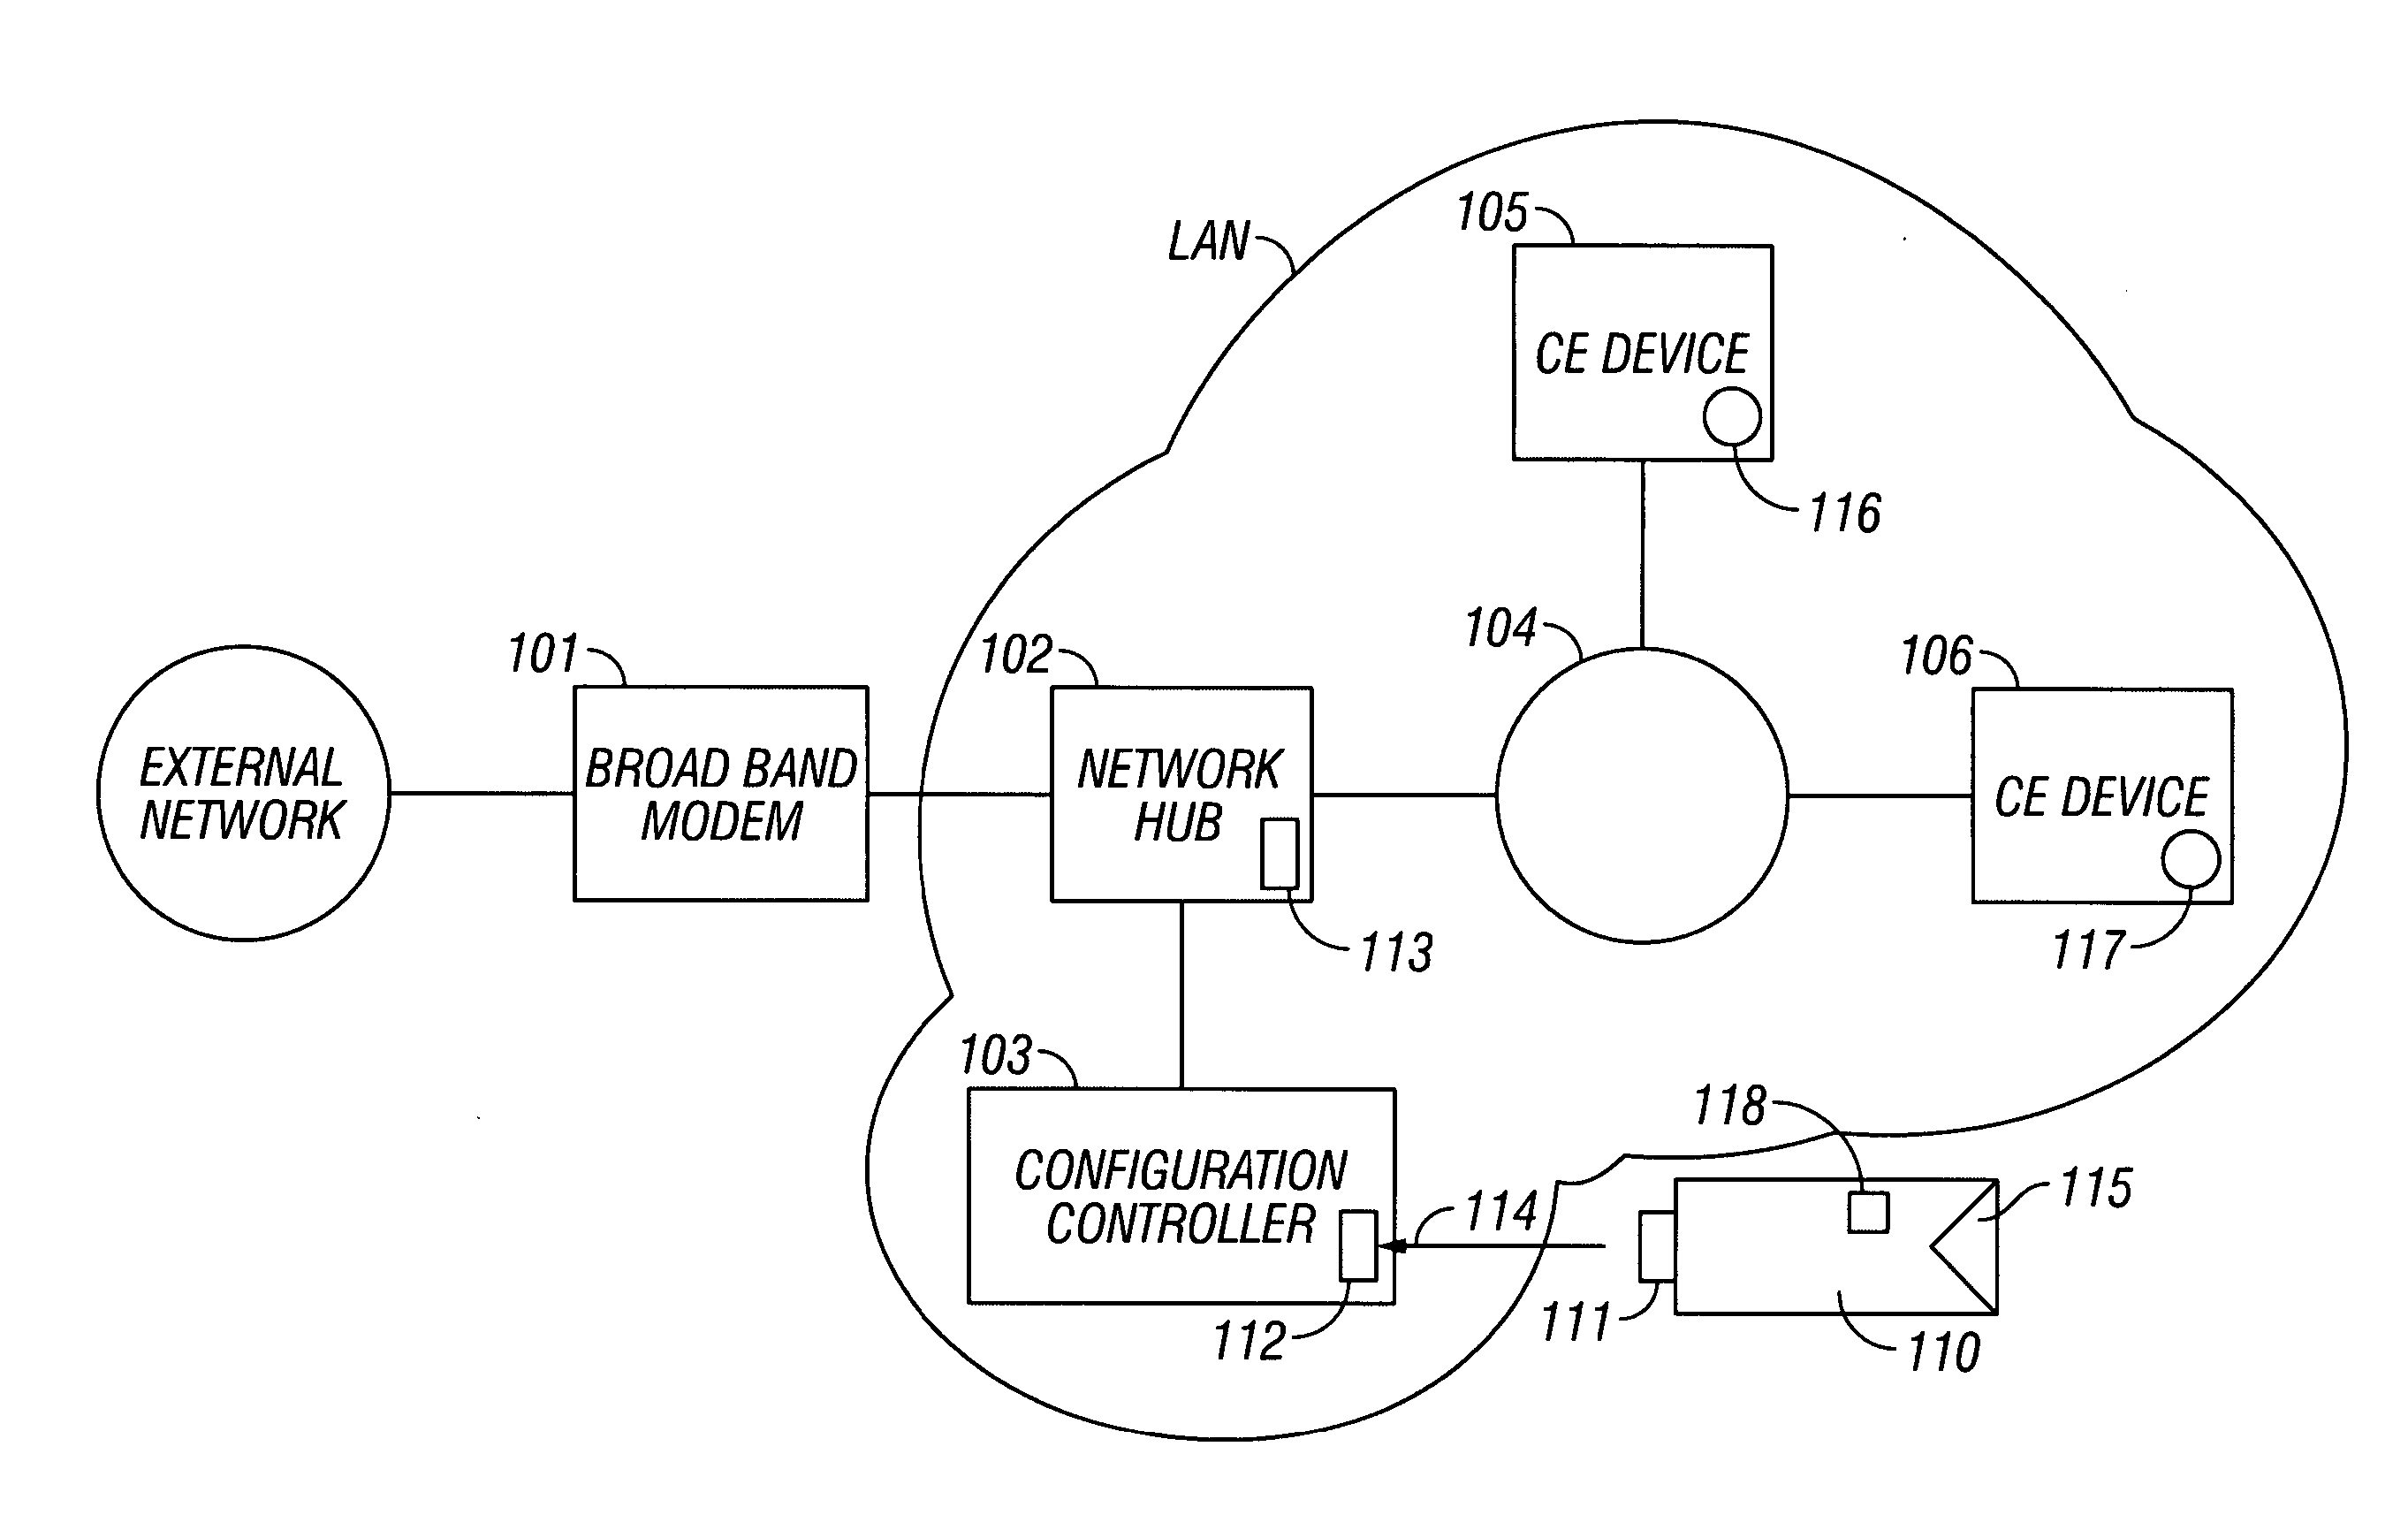 System and method for device configuration using a portable flash memory storage device with an infrared transmitter